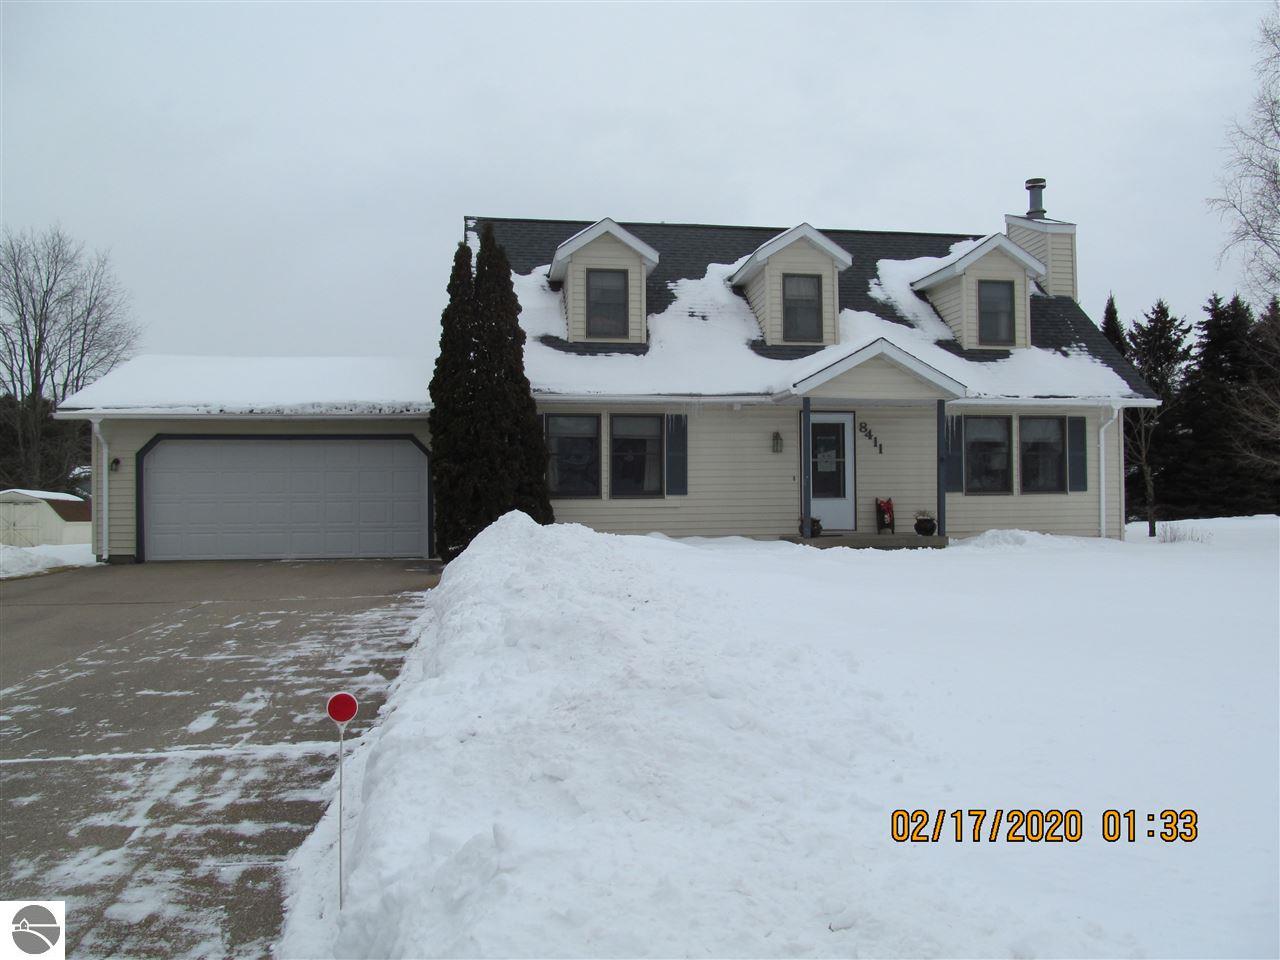 8411 Valley Forge Drive, Cadillac, MI 49601 photo 1 of 40